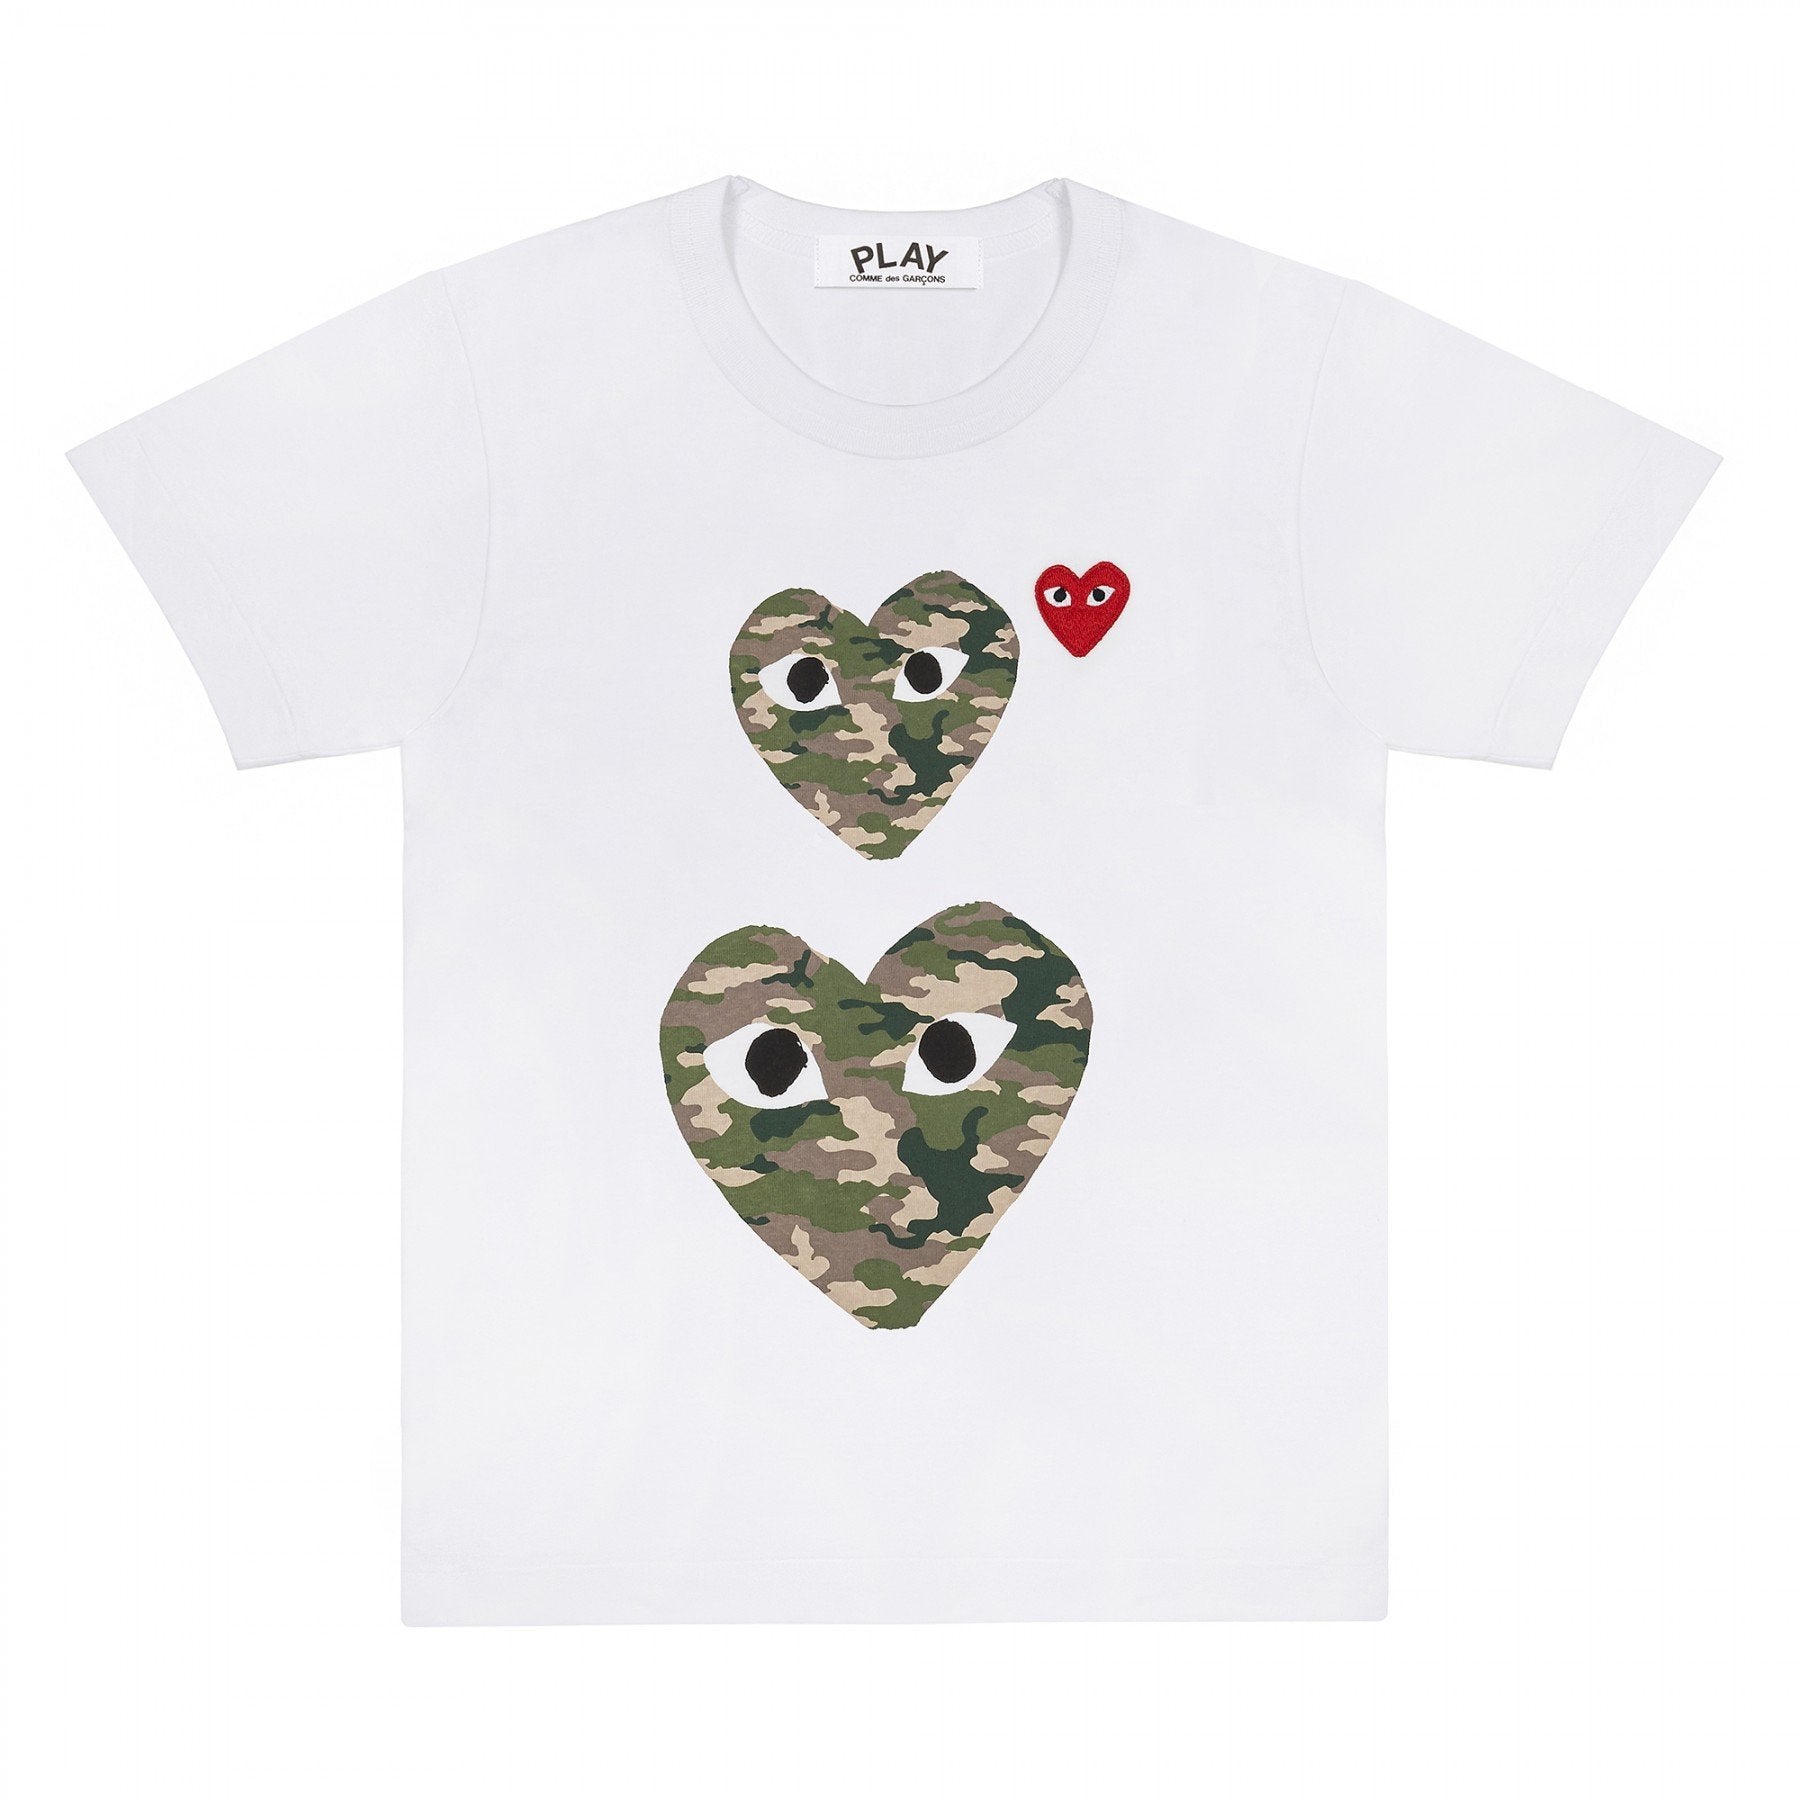 PLAY White T-Shirt with Camo Printed Small and Big Hearts